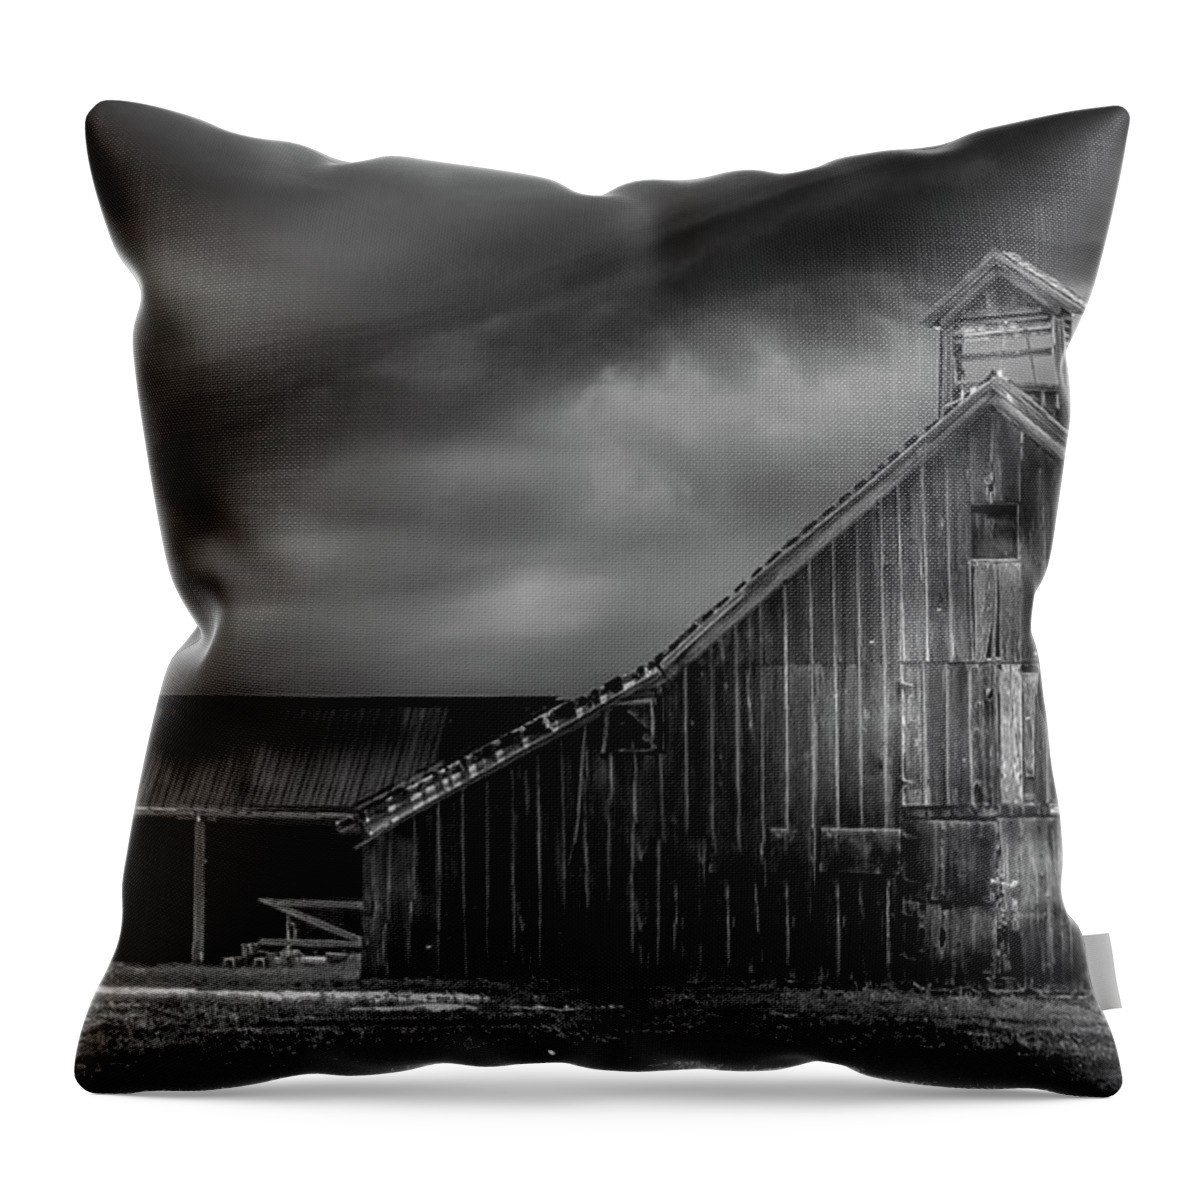 Barn Throw Pillow featuring the photograph Historic Barn by Laura Terriere